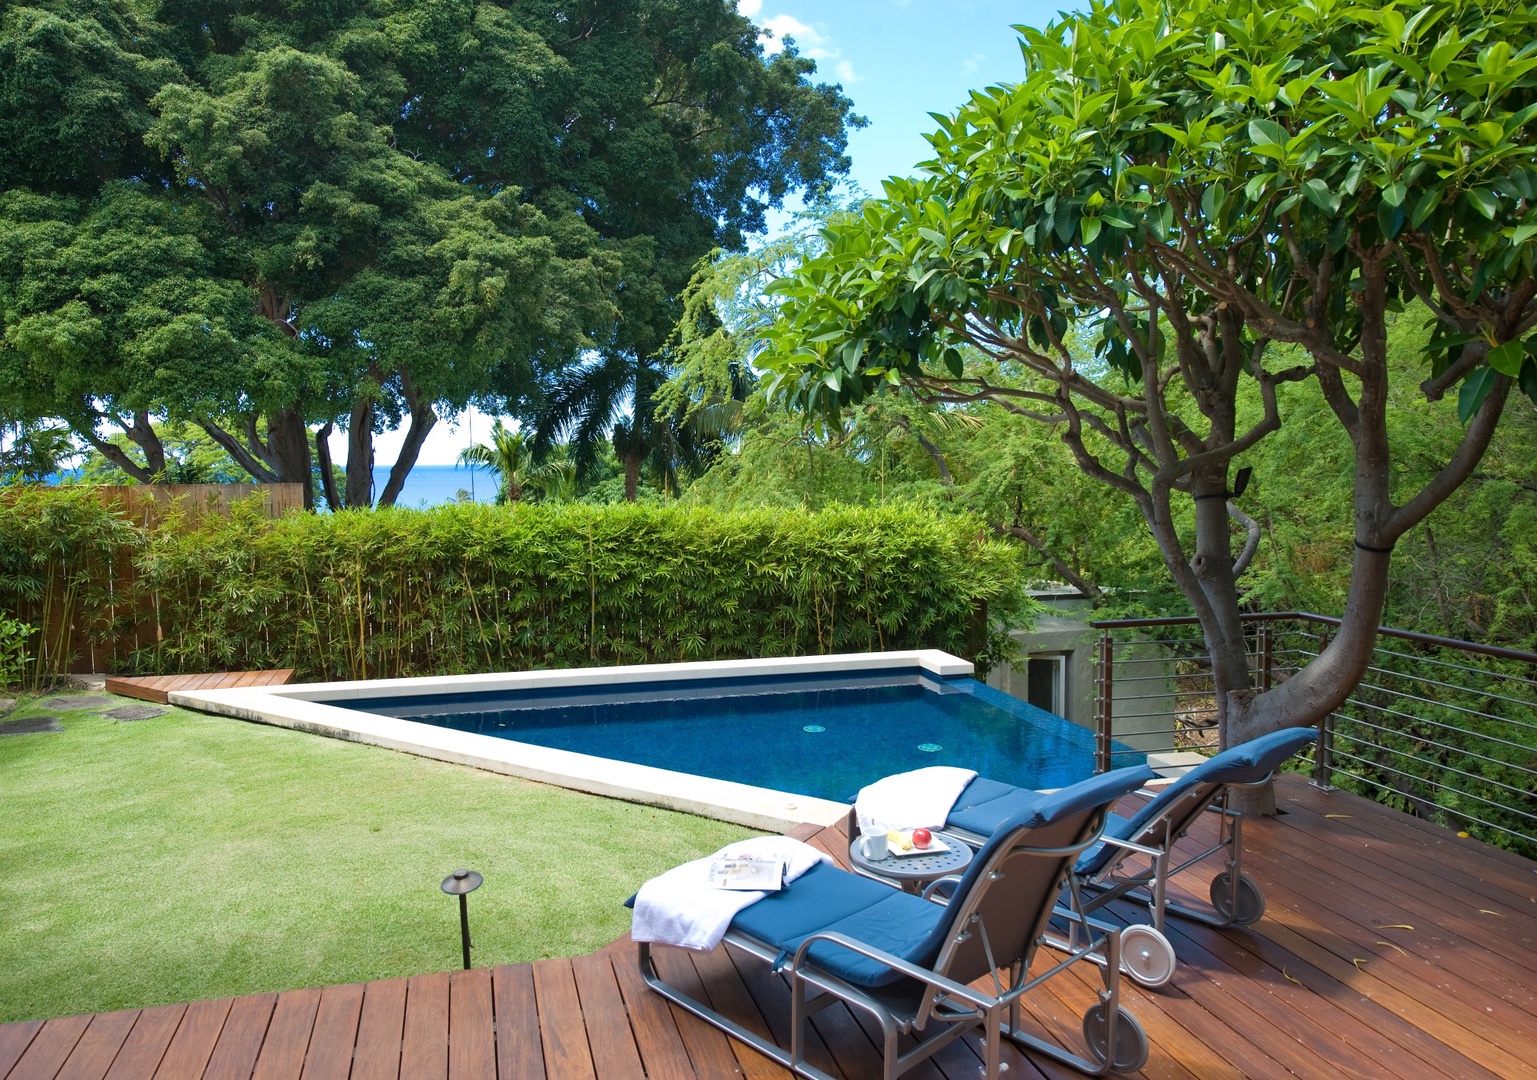 Honolulu Vacation Rentals, Casa de Makalei - Lounge poolside or cool off in the private pool